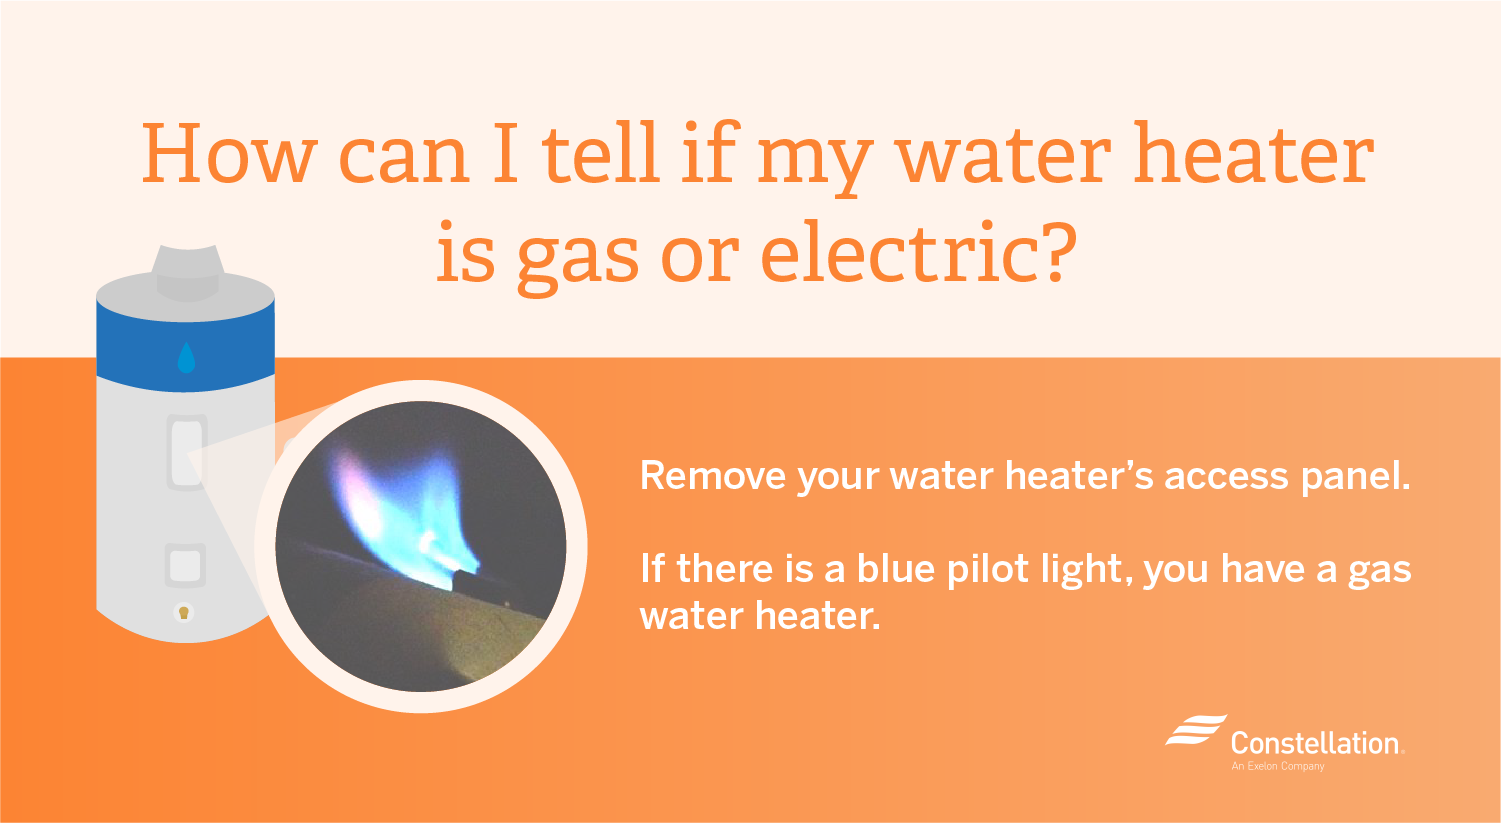 how can I tell if my water heater is gas or electric